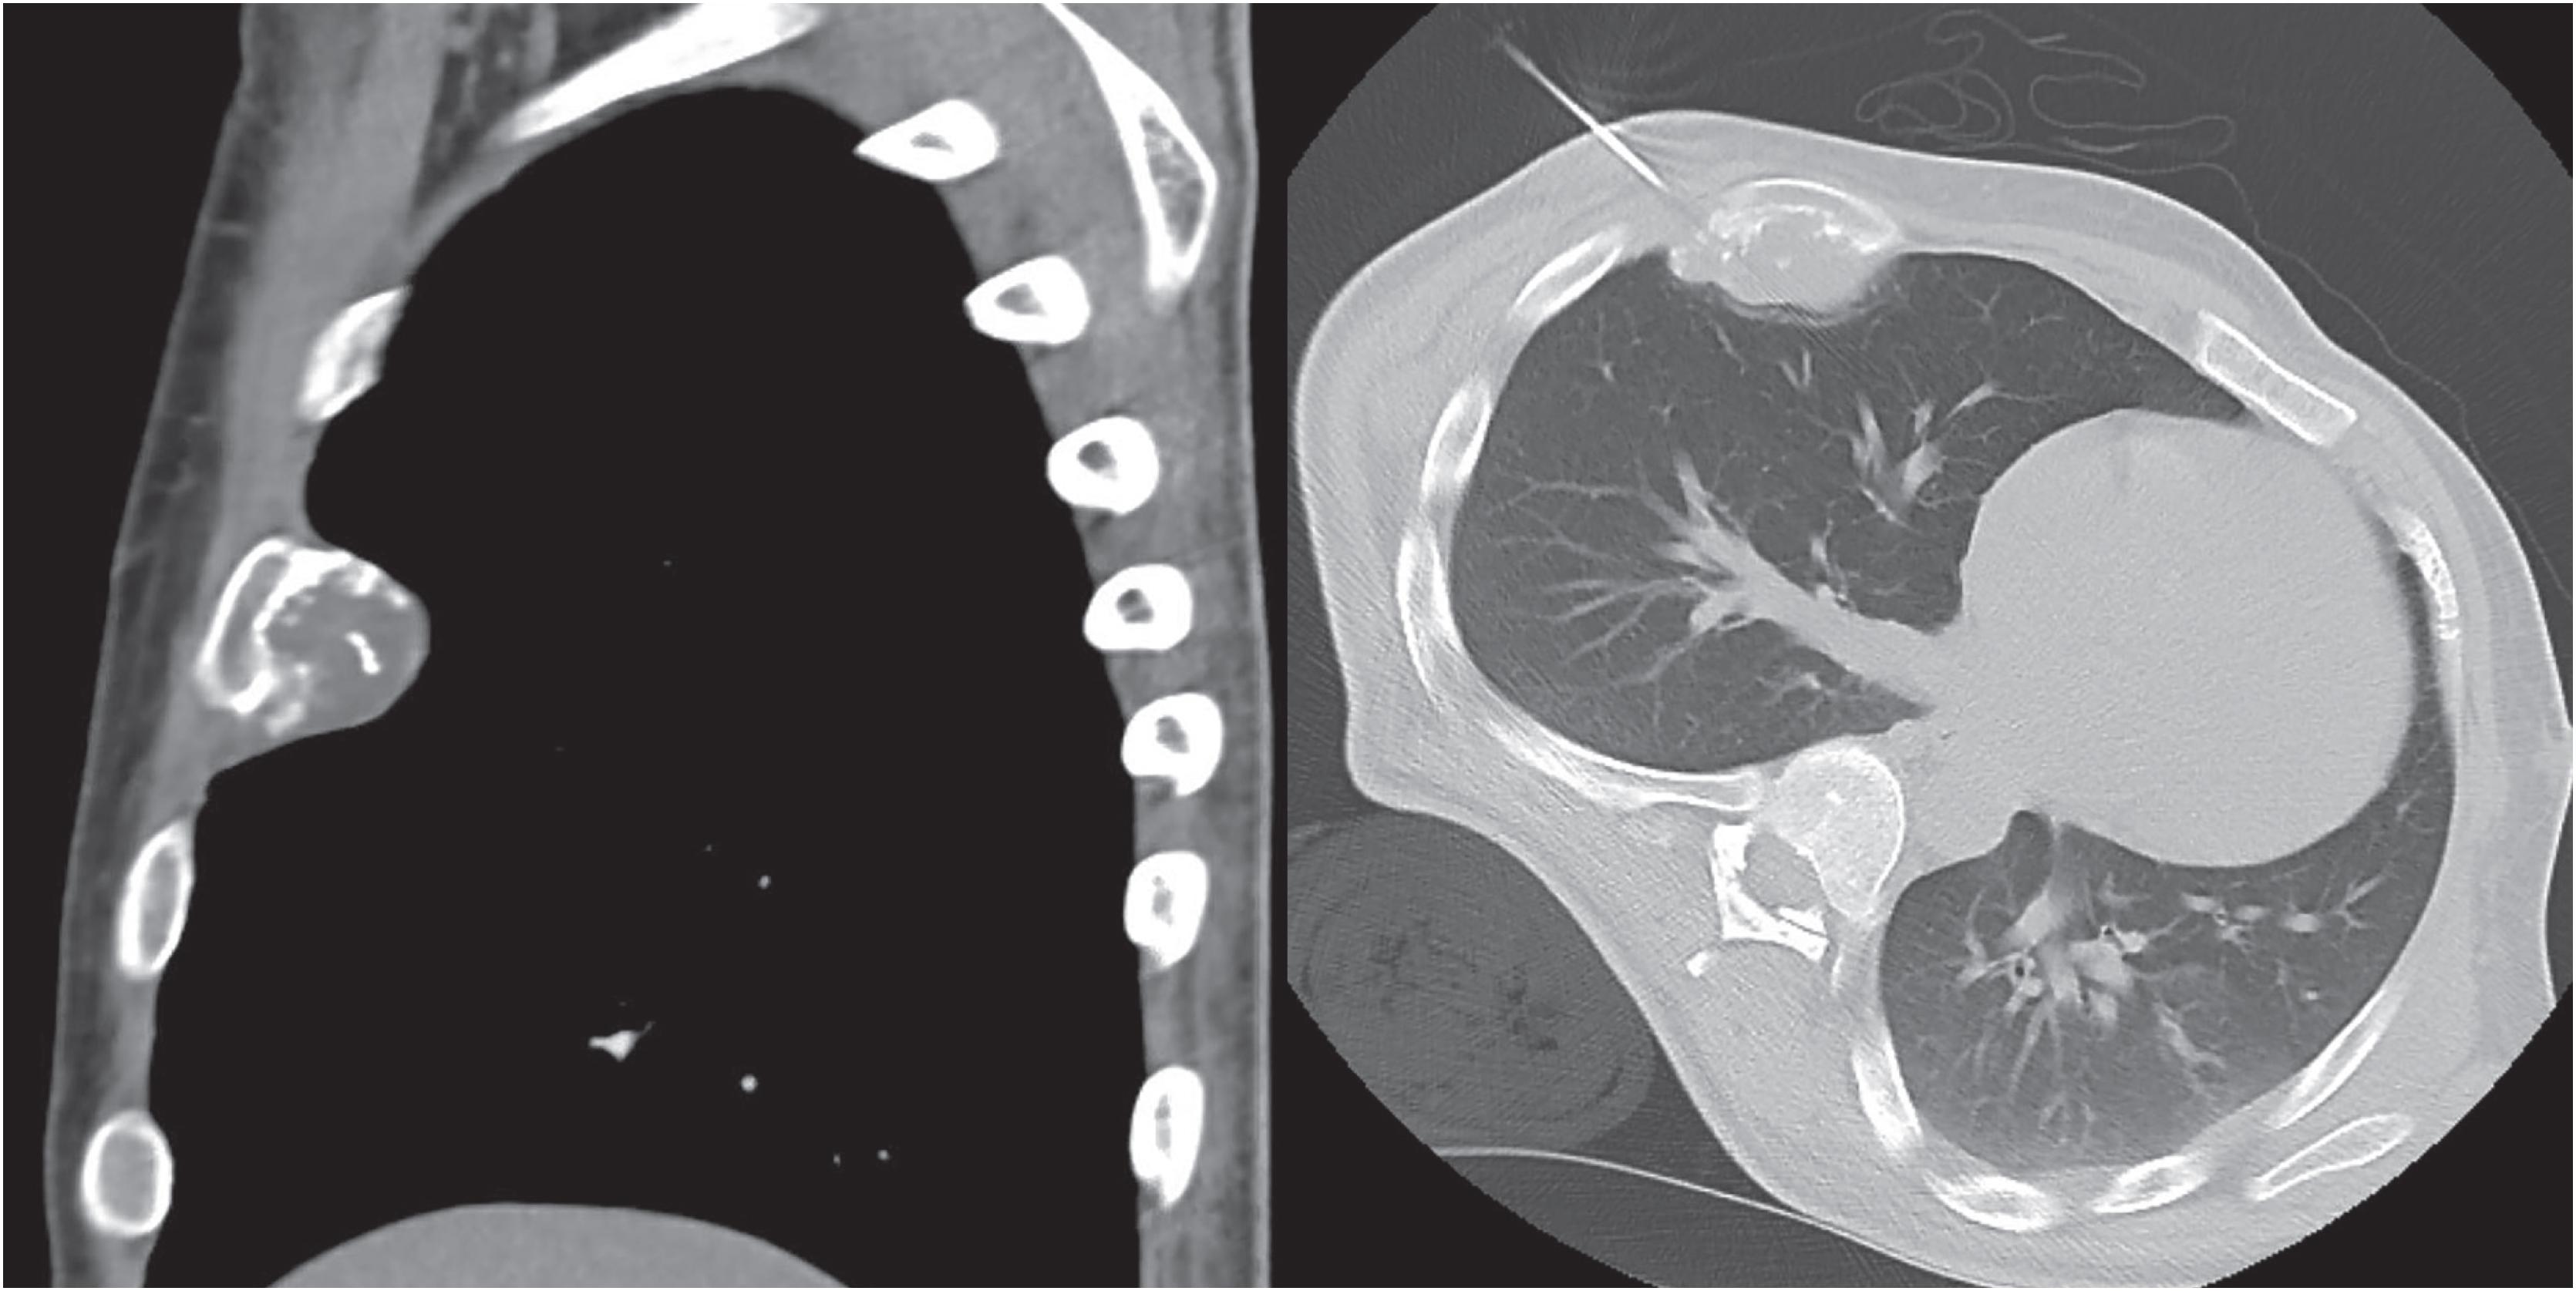 Fig. 17.24, CT images of a large periosteal chondroma show a lobulated mass on the surface of the anterior fourth rib with internal calcification. The cortex of the rib appears intact (left). Core biopsy of surface cartilaginous tumors (right) may be challenging to interpret as surface tumors may demonstrate increased cellularity and needle biopsies can impede the ability to assess architecture.